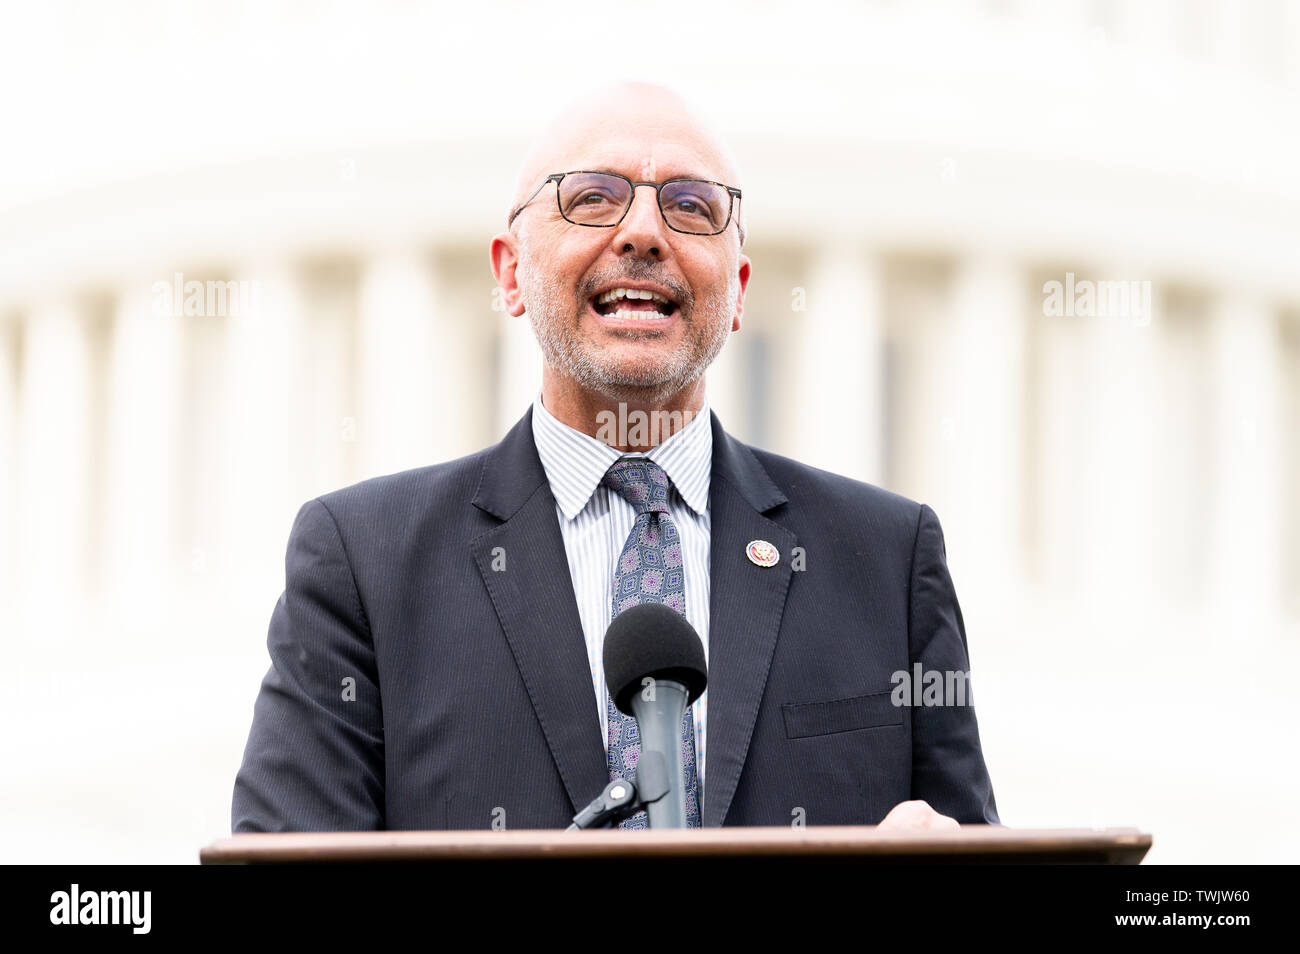 Washington, United States. 20th June, 2019. U.S. Representative Ted Deutch (D-FL) speaks during the event in front of the Capitol to urge the passage of the H.R. 8 universal (gun ownership) background checks legislation. Event was held at the grass on the eastern side of the U.S. Capitol in Washington, DC. Credit: SOPA Images Limited/Alamy Live News Stock Photo